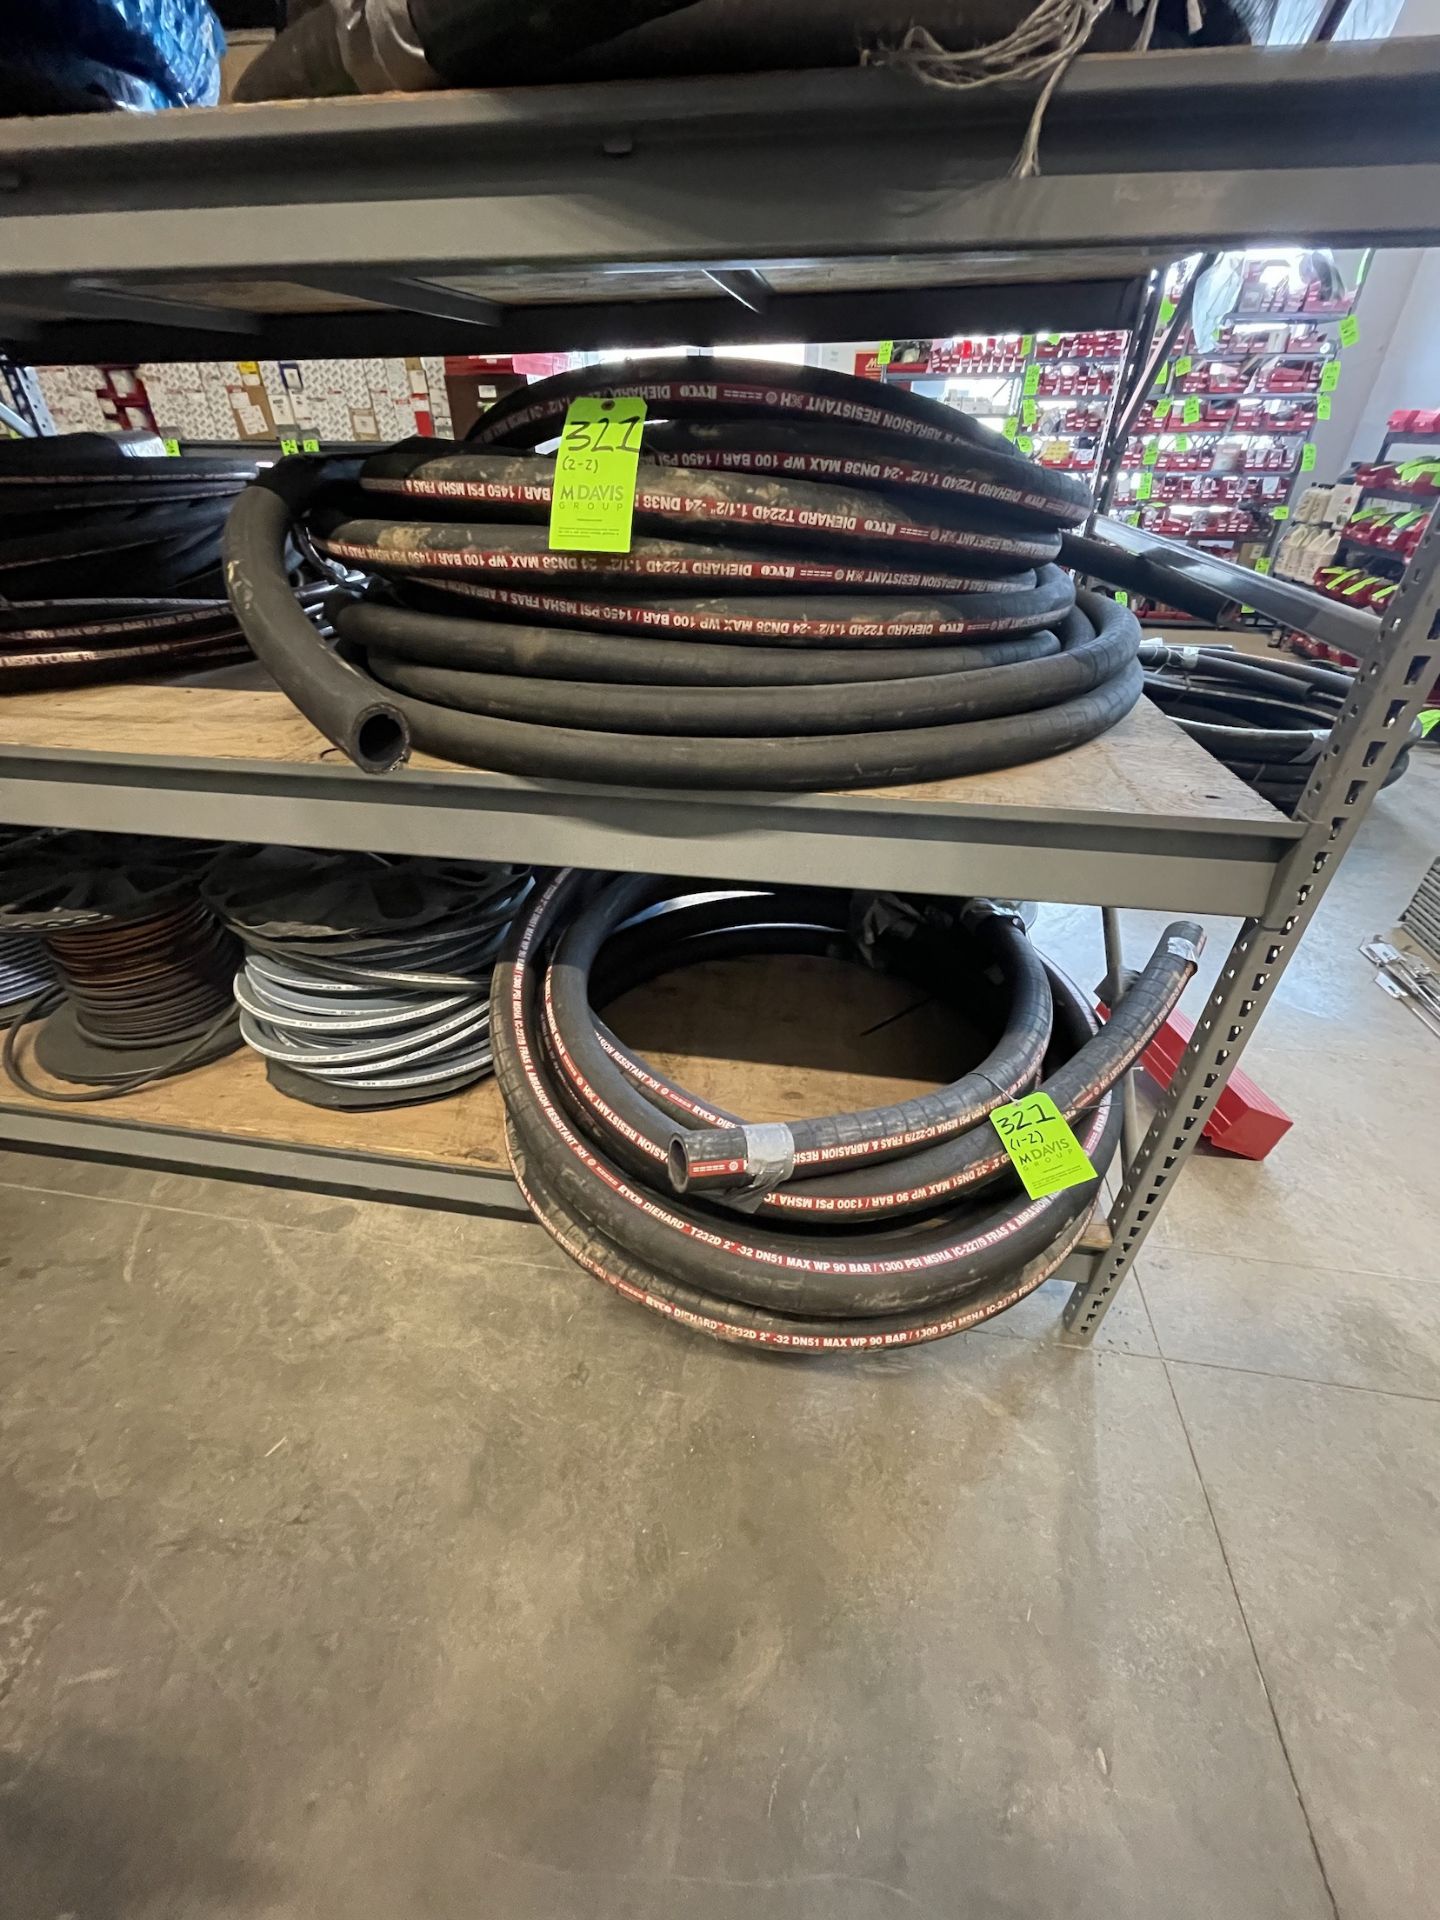 (2) RYCO DIEHARD HYDRAULIC HOSE REELS 1 1/2" and 2" 1450psi (ALL PURCHASES MUST BE PAID FOR AND